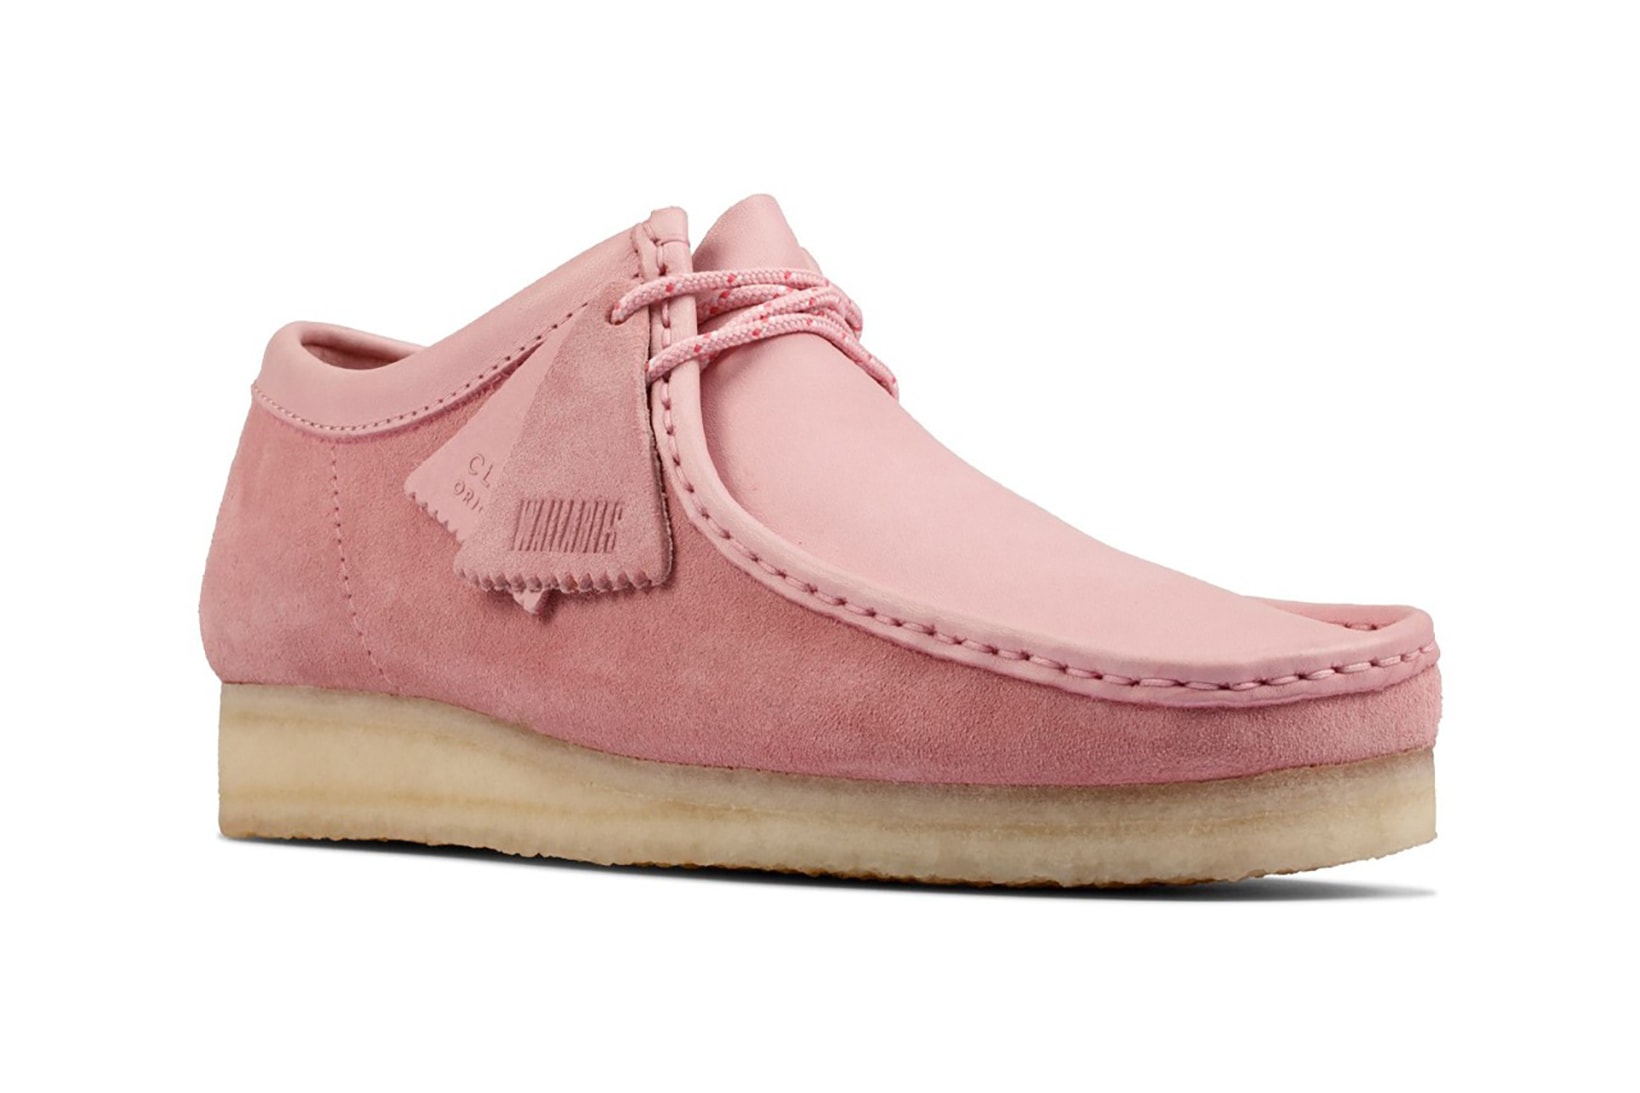 clarks originals combi wallabee pastel pink rose colorway footwear shoes lateral